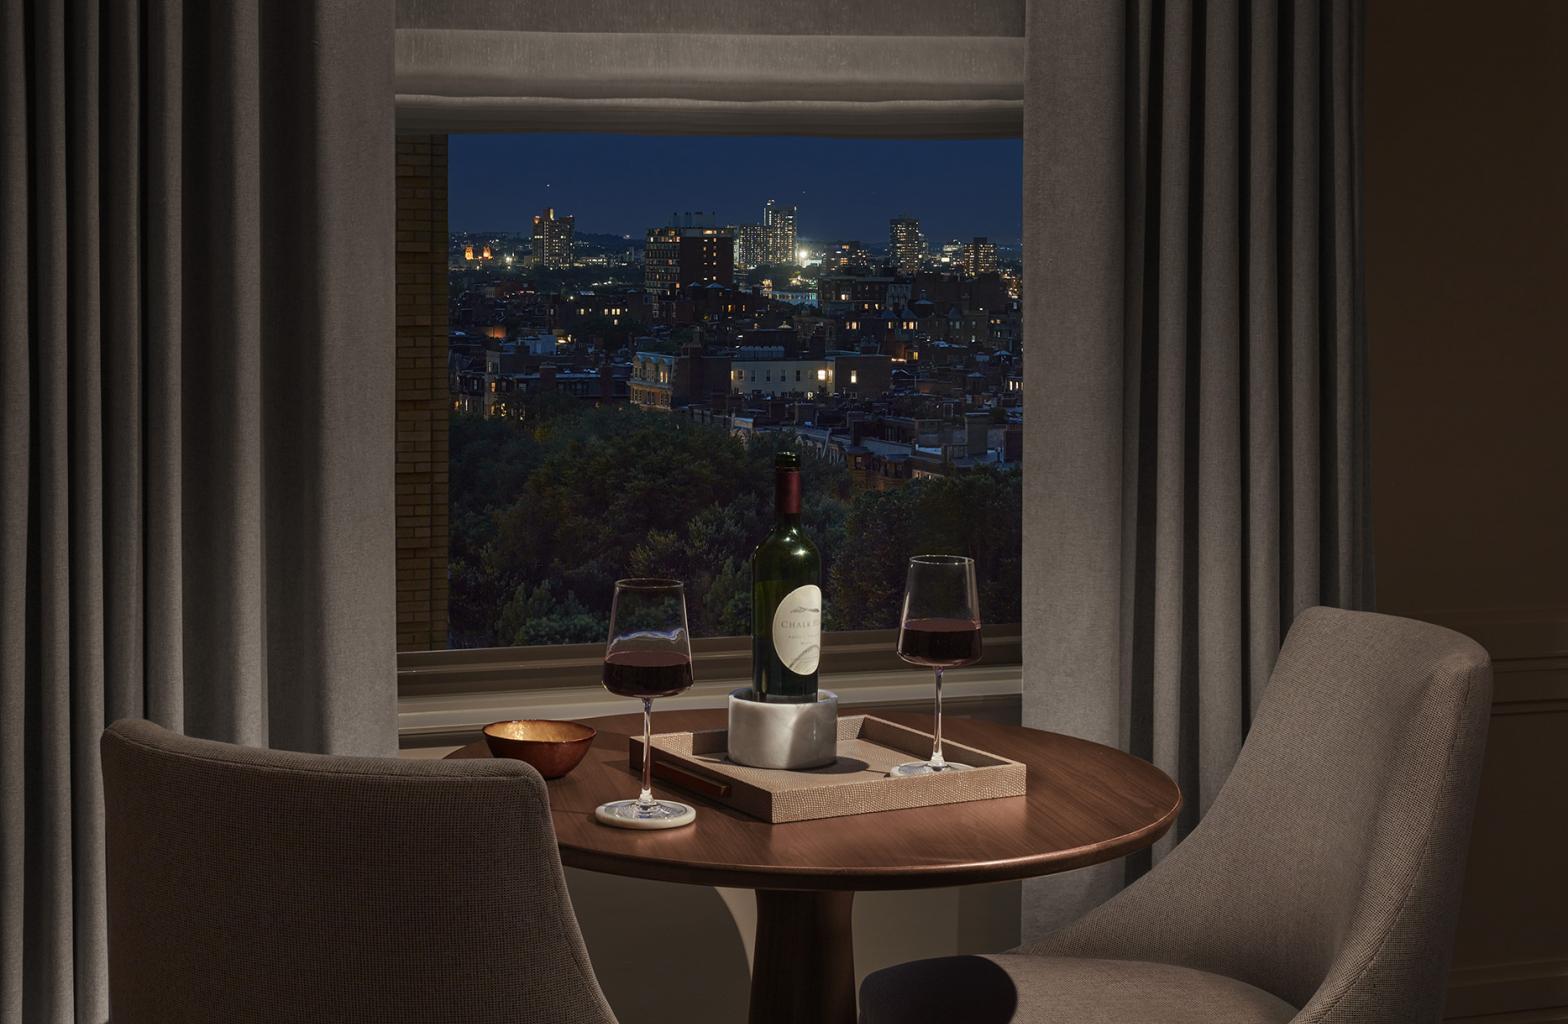 dimly lit sitting area with wine and wine glasses sitting on table beside evening view of city